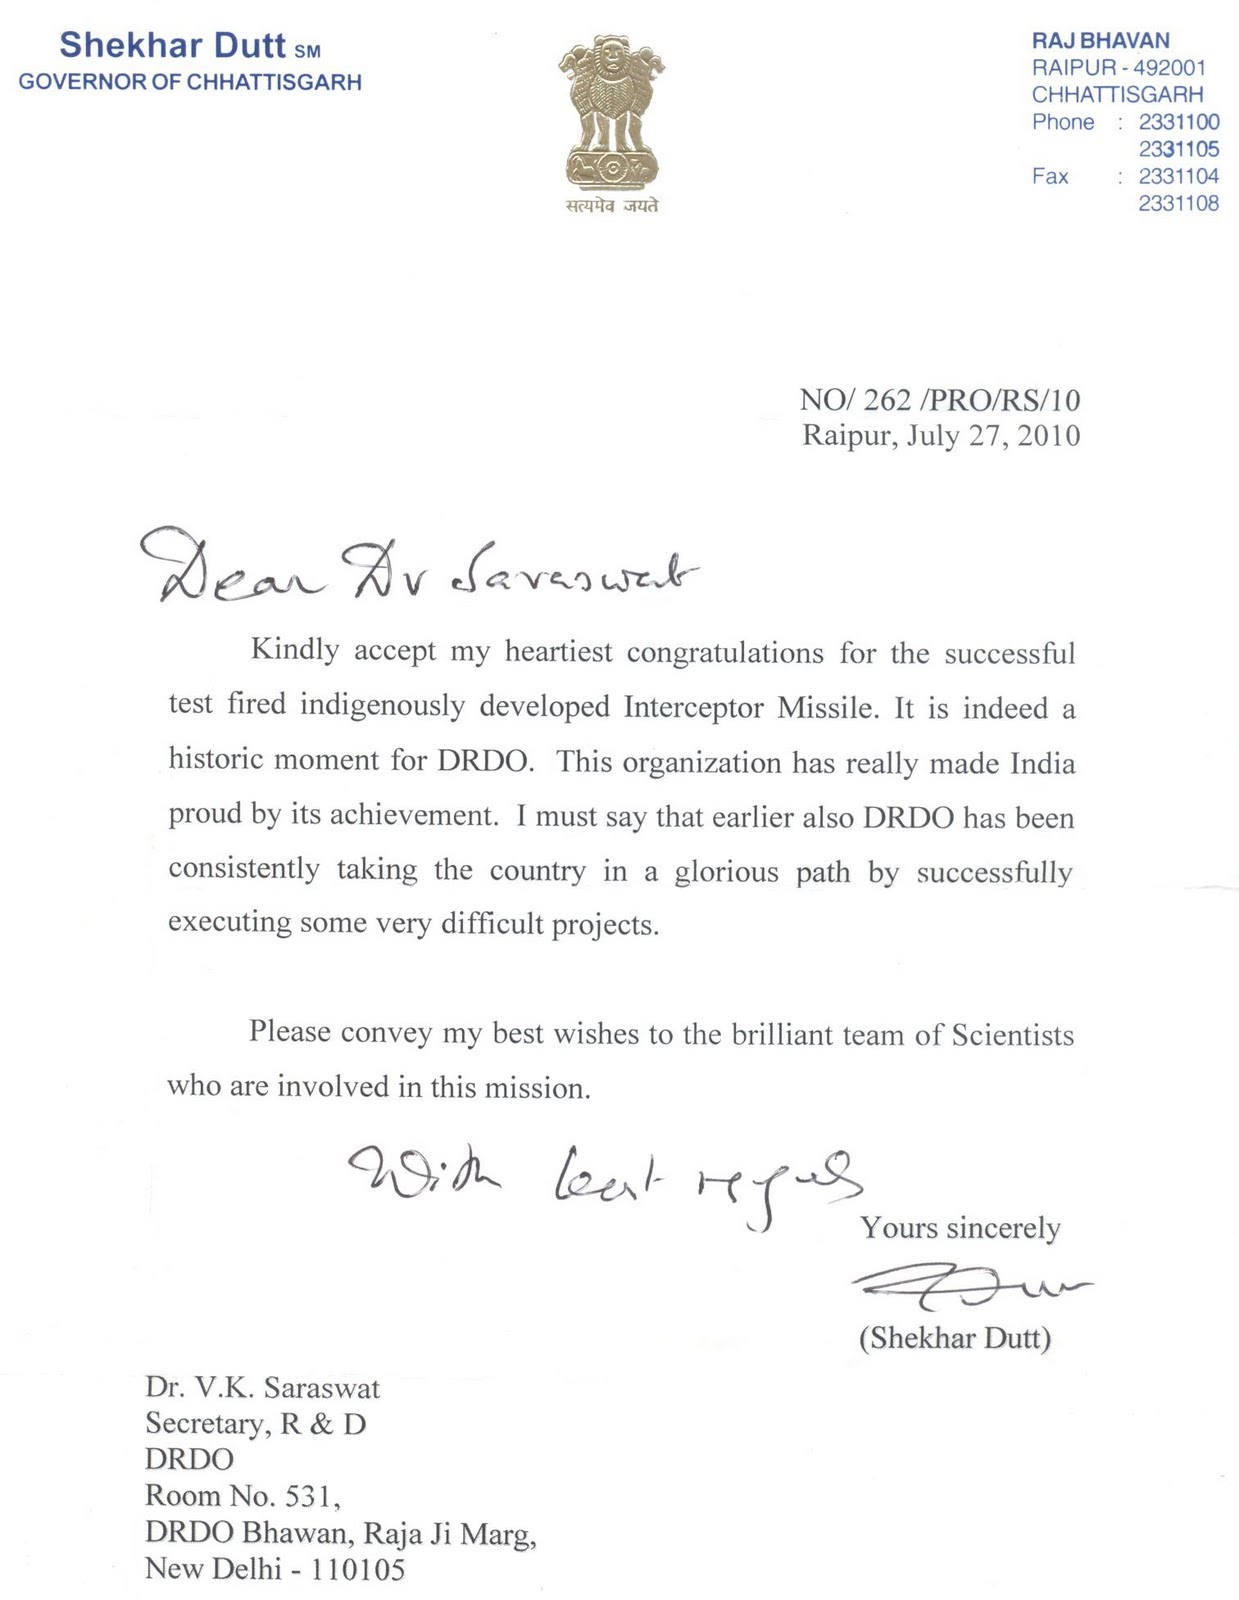 Message_from_Governor_of_Chhatisgarh-799573.jpg